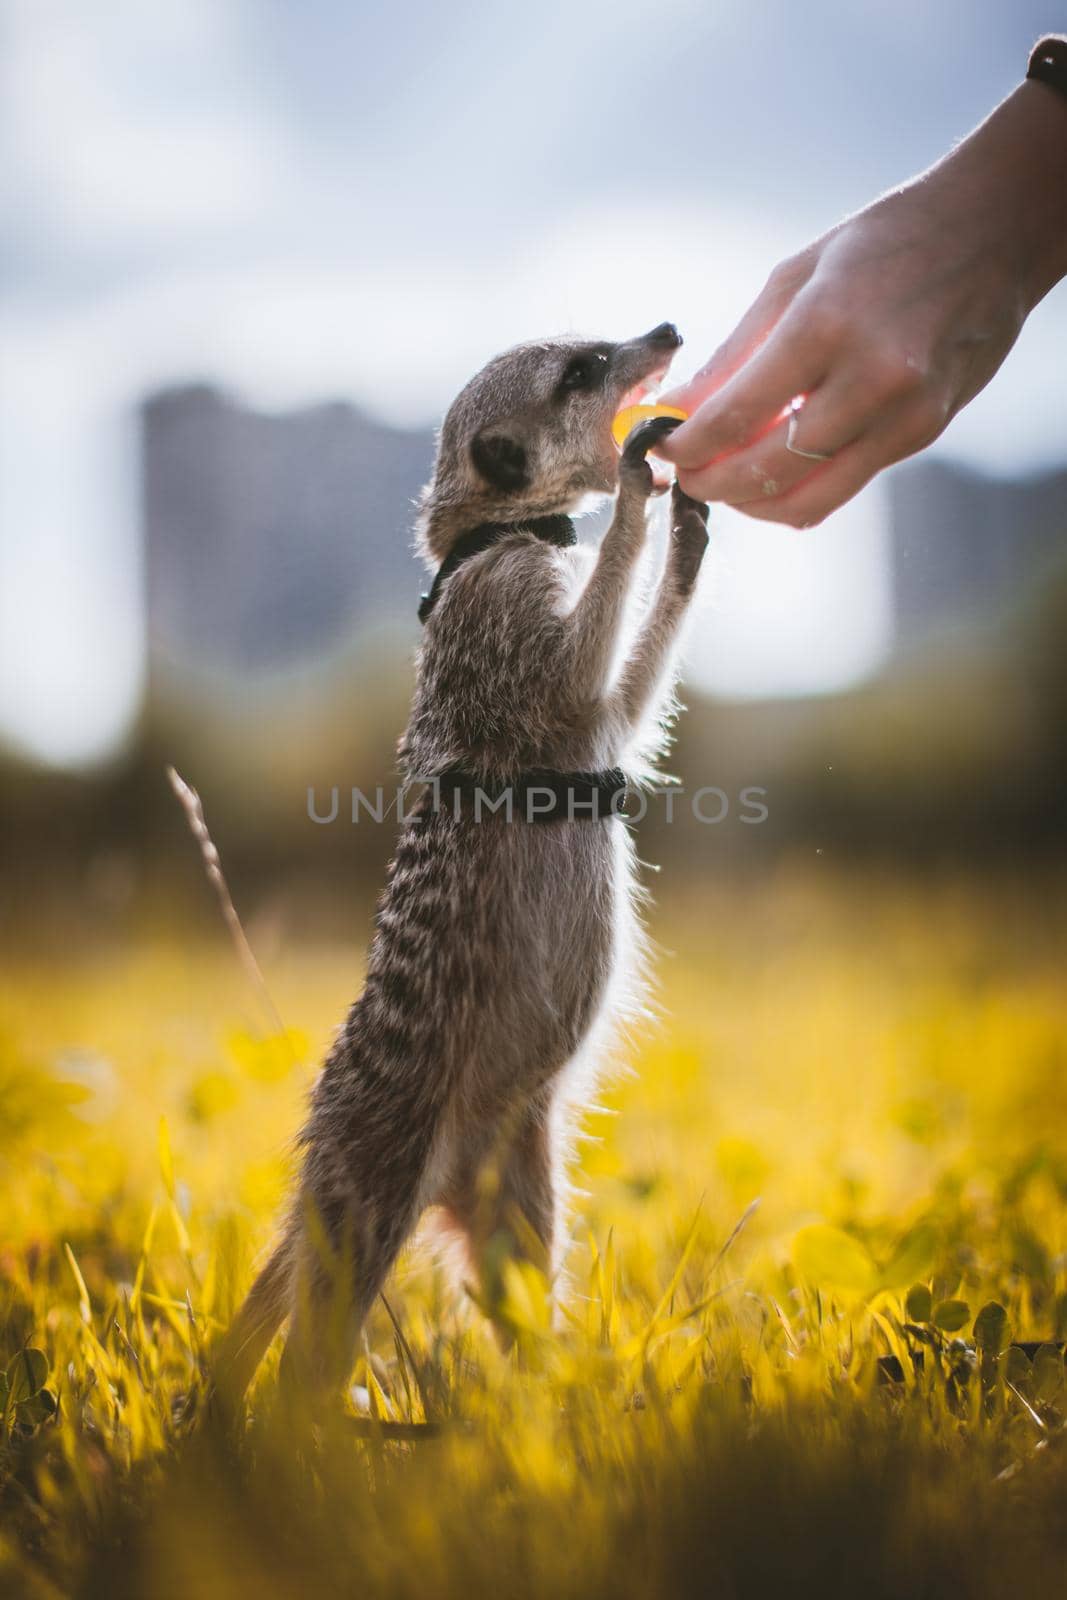 The meerkat or suricate, 1 years old walking outside on grass